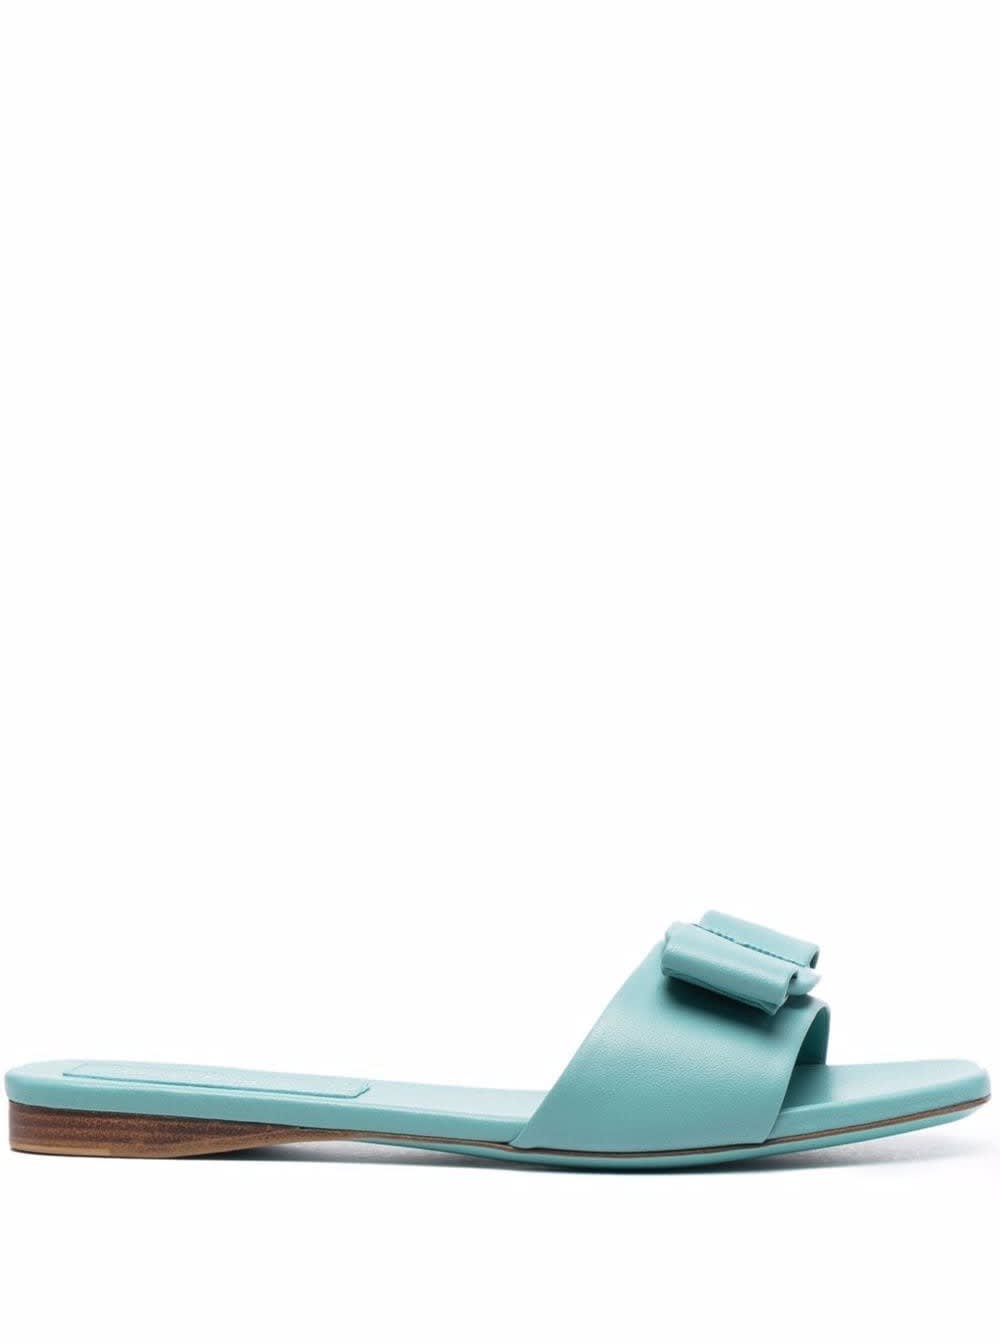 Salvatore Ferragamo Womans Vicky Flat Light Blue Leather Mules With Bow